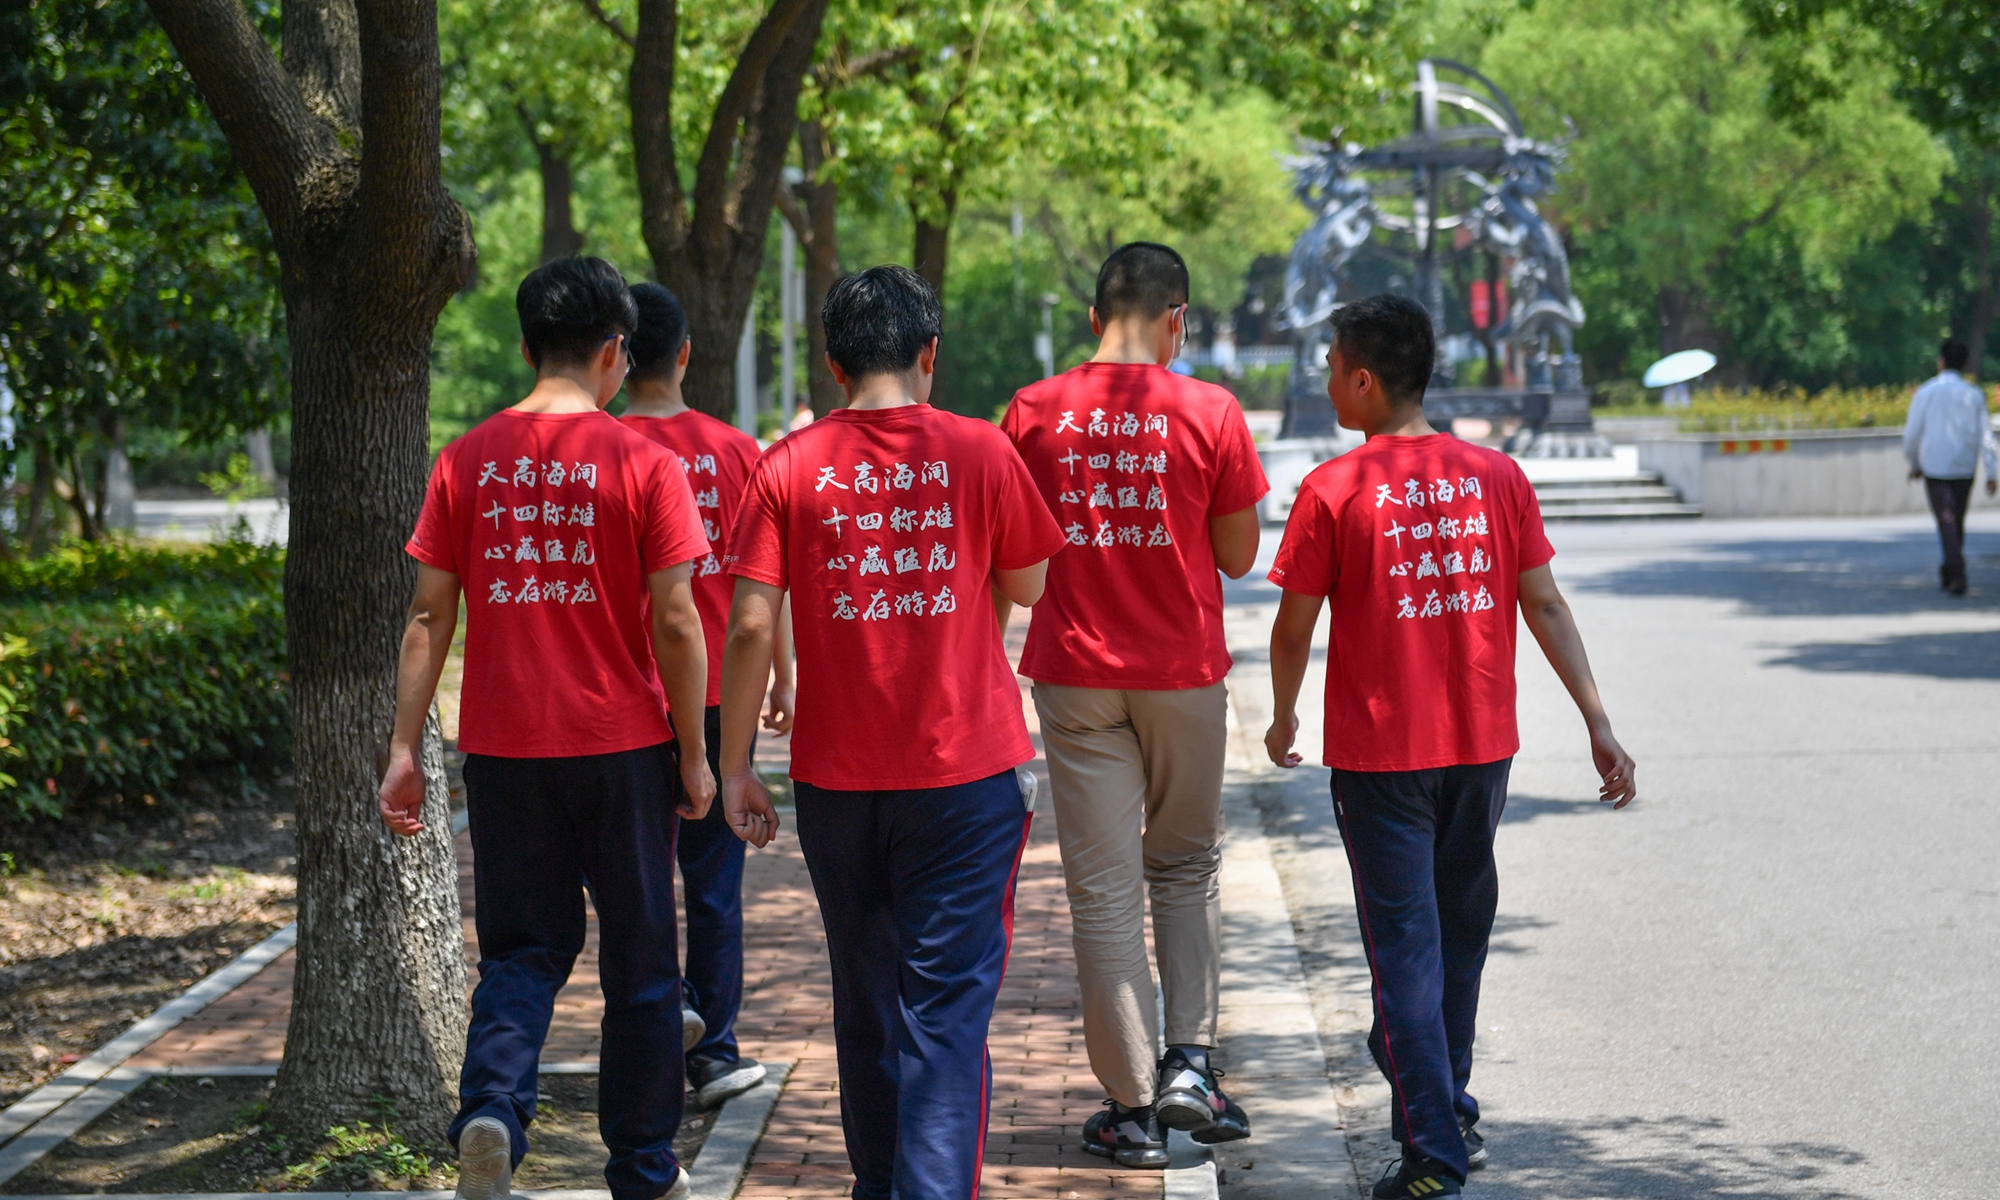 Five students from Suzhou, East China's Jiangsu Province wear red T-shirts emblazoned with words of encouragement on Sunday. The students, along with 10.78 million other Chinese students are set to participate in the gaokao, the national college entrance examinations, scheduled for June 7 and 8. Photo: VCG